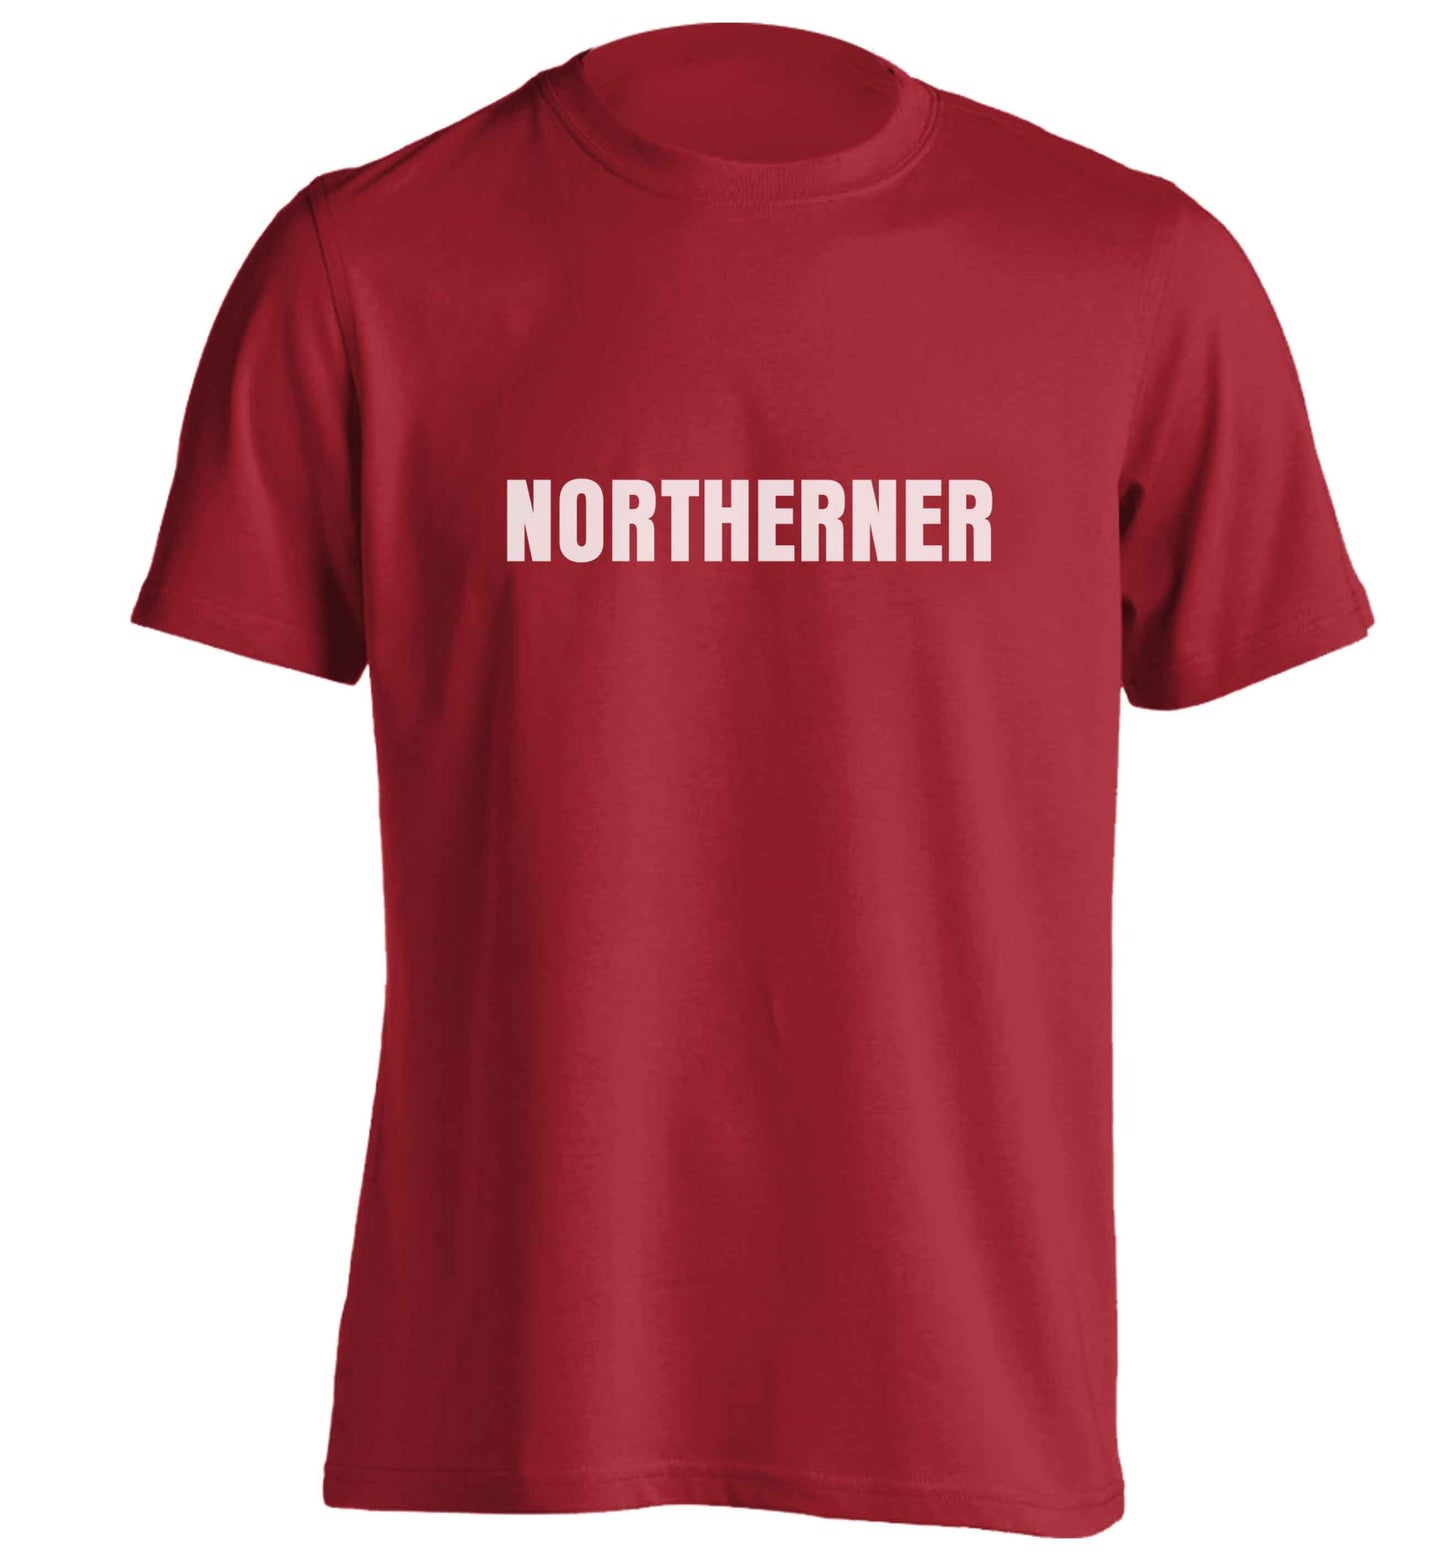 Northerner adults unisex red Tshirt 2XL